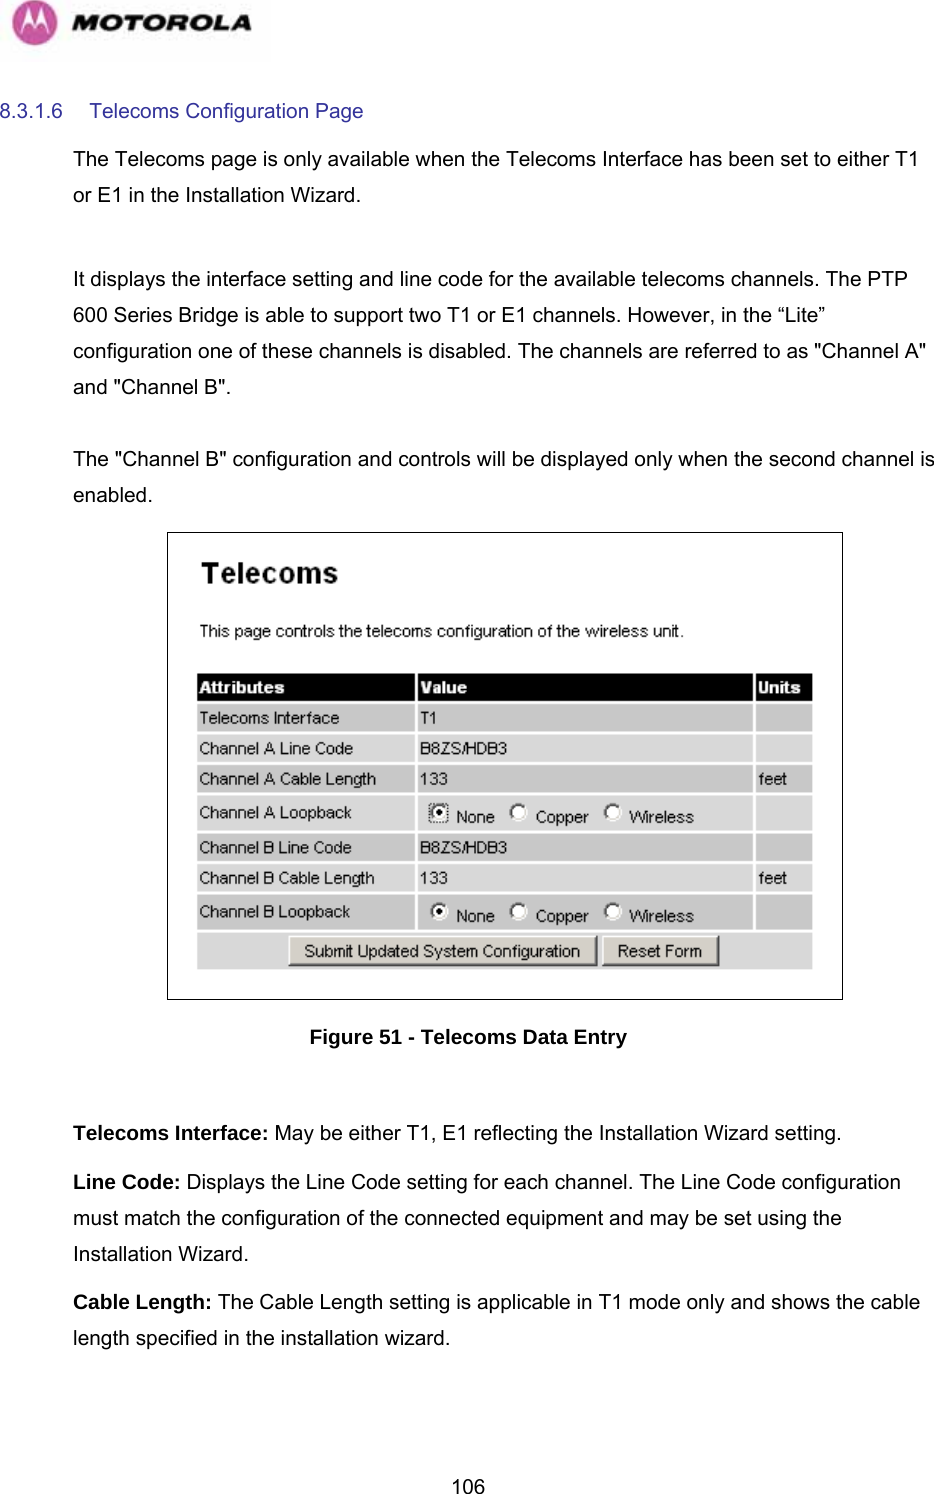   1068.3.1.6  Telecoms Configuration Page The Telecoms page is only available when the Telecoms Interface has been set to either T1 or E1 in the Installation Wizard.   It displays the interface setting and line code for the available telecoms channels. The PTP 600 Series Bridge is able to support two T1 or E1 channels. However, in the “Lite” configuration one of these channels is disabled. The channels are referred to as &quot;Channel A&quot; and &quot;Channel B&quot;.   The &quot;Channel B&quot; configuration and controls will be displayed only when the second channel is enabled.   Figure 51 - Telecoms Data Entry  Telecoms Interface: May be either T1, E1 reflecting the Installation Wizard setting. Line Code: Displays the Line Code setting for each channel. The Line Code configuration must match the configuration of the connected equipment and may be set using the Installation Wizard.  Cable Length: The Cable Length setting is applicable in T1 mode only and shows the cable length specified in the installation wizard.  